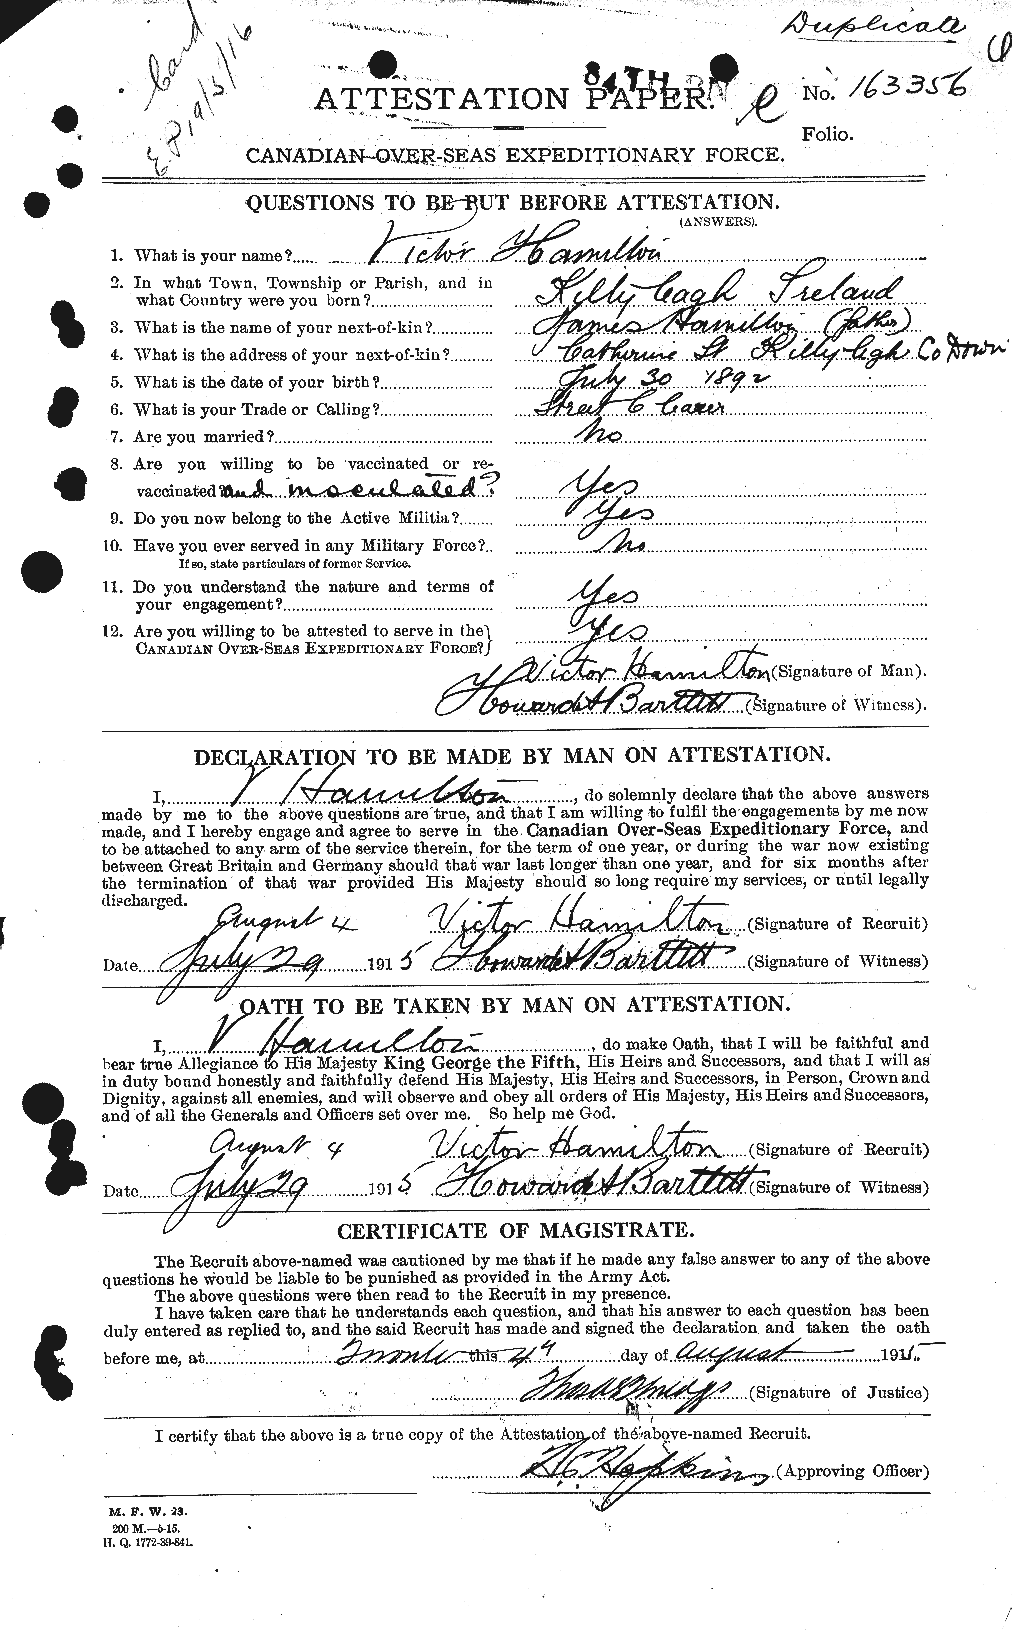 Personnel Records of the First World War - CEF 374804a